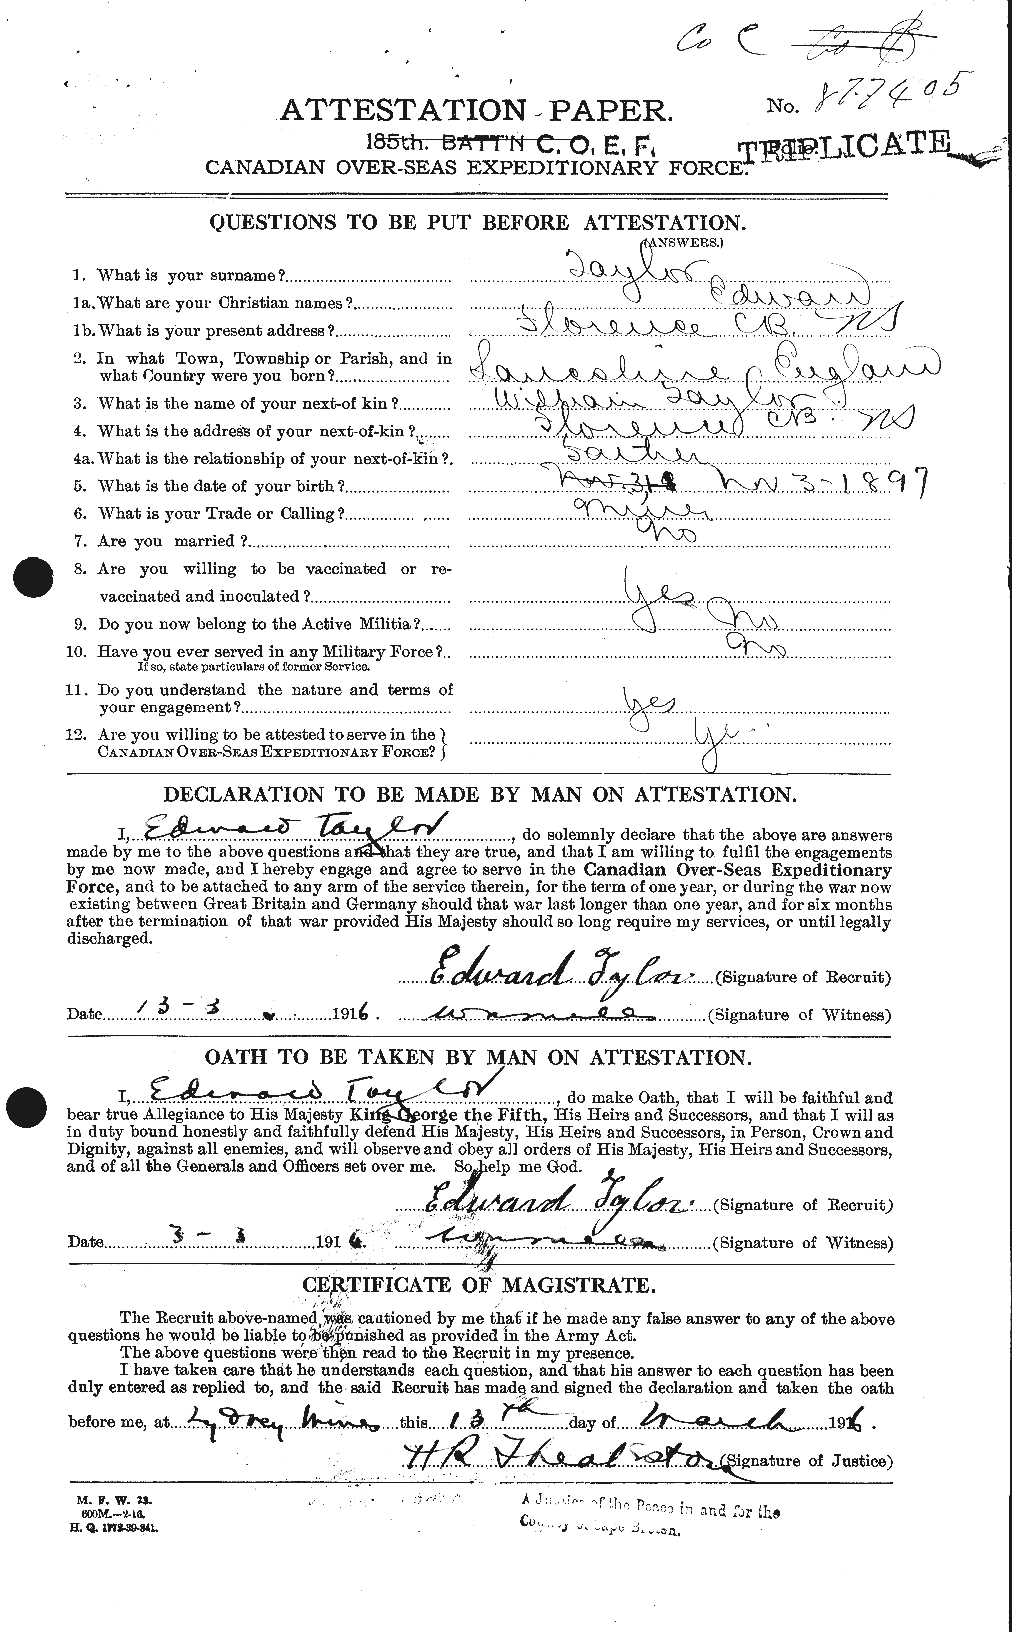 Personnel Records of the First World War - CEF 627280a